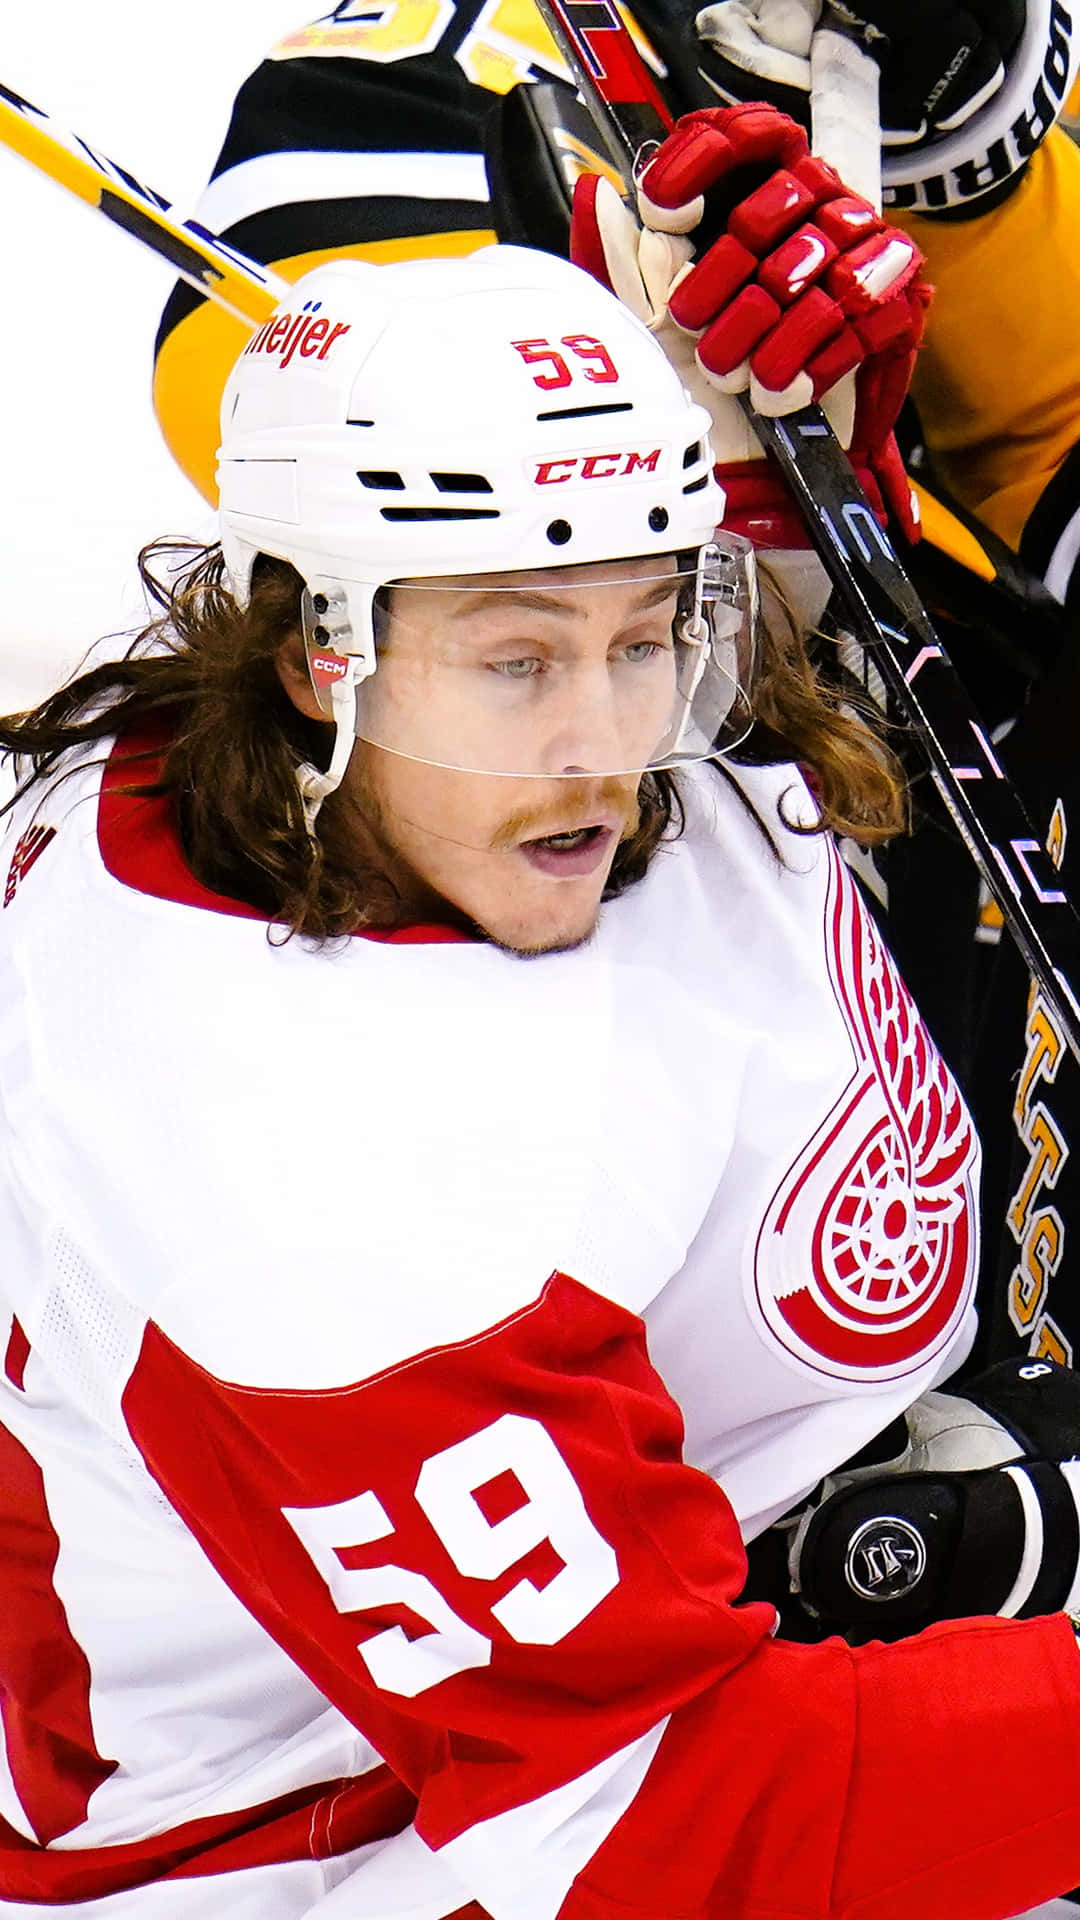 Tyler Bertuzzi in action with the Detroit Red Wings Wallpaper